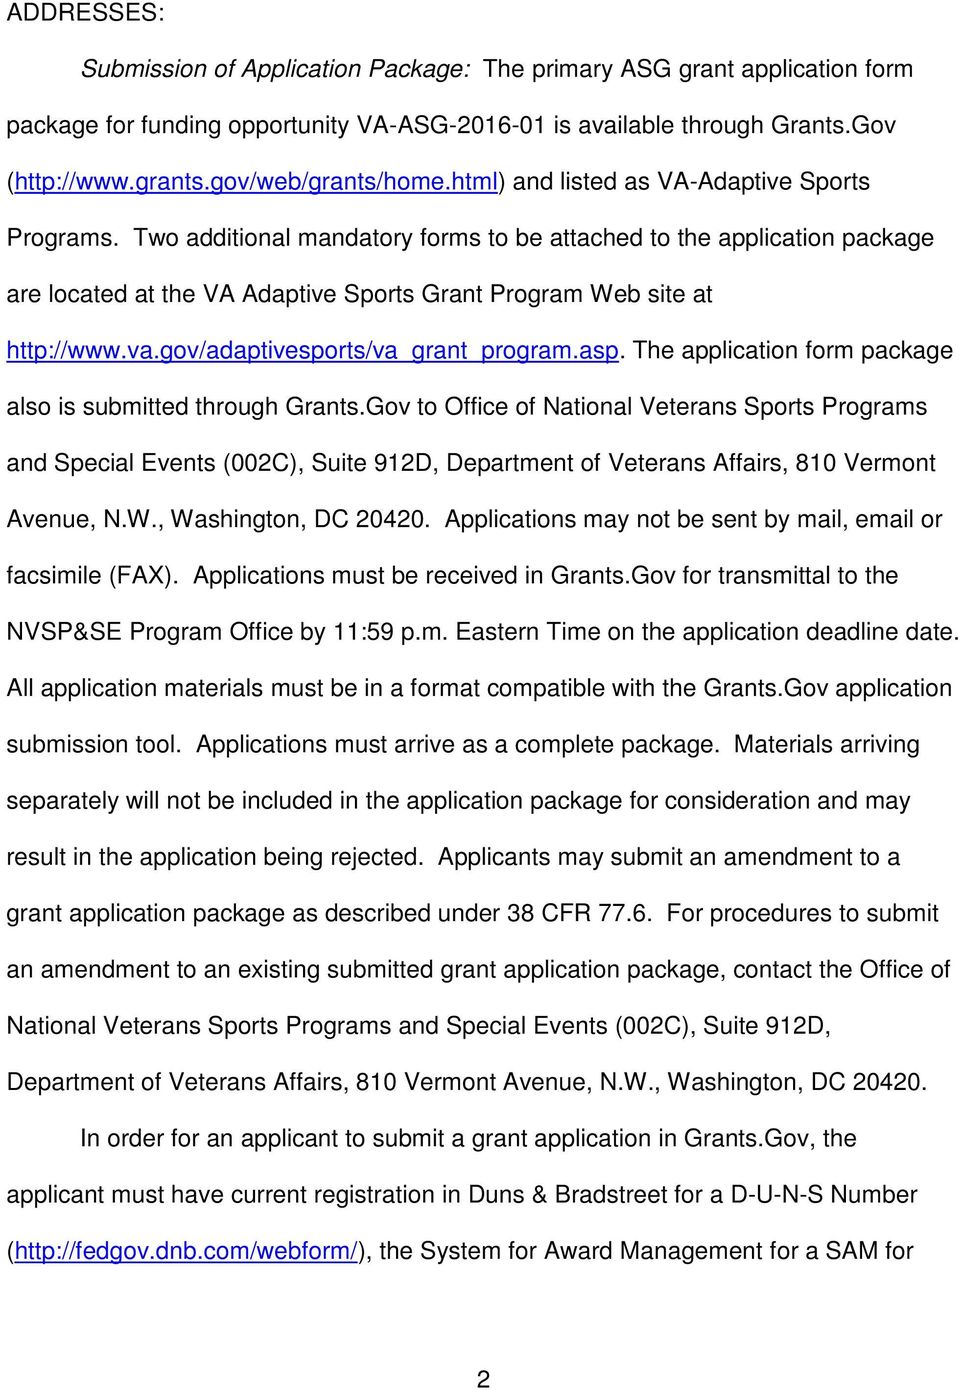 Two additional mandatory forms to be attached to the application package are located at the VA Adaptive Sports Grant Program Web site at http://www.va.gov/adaptivesports/va_grant_program.asp.